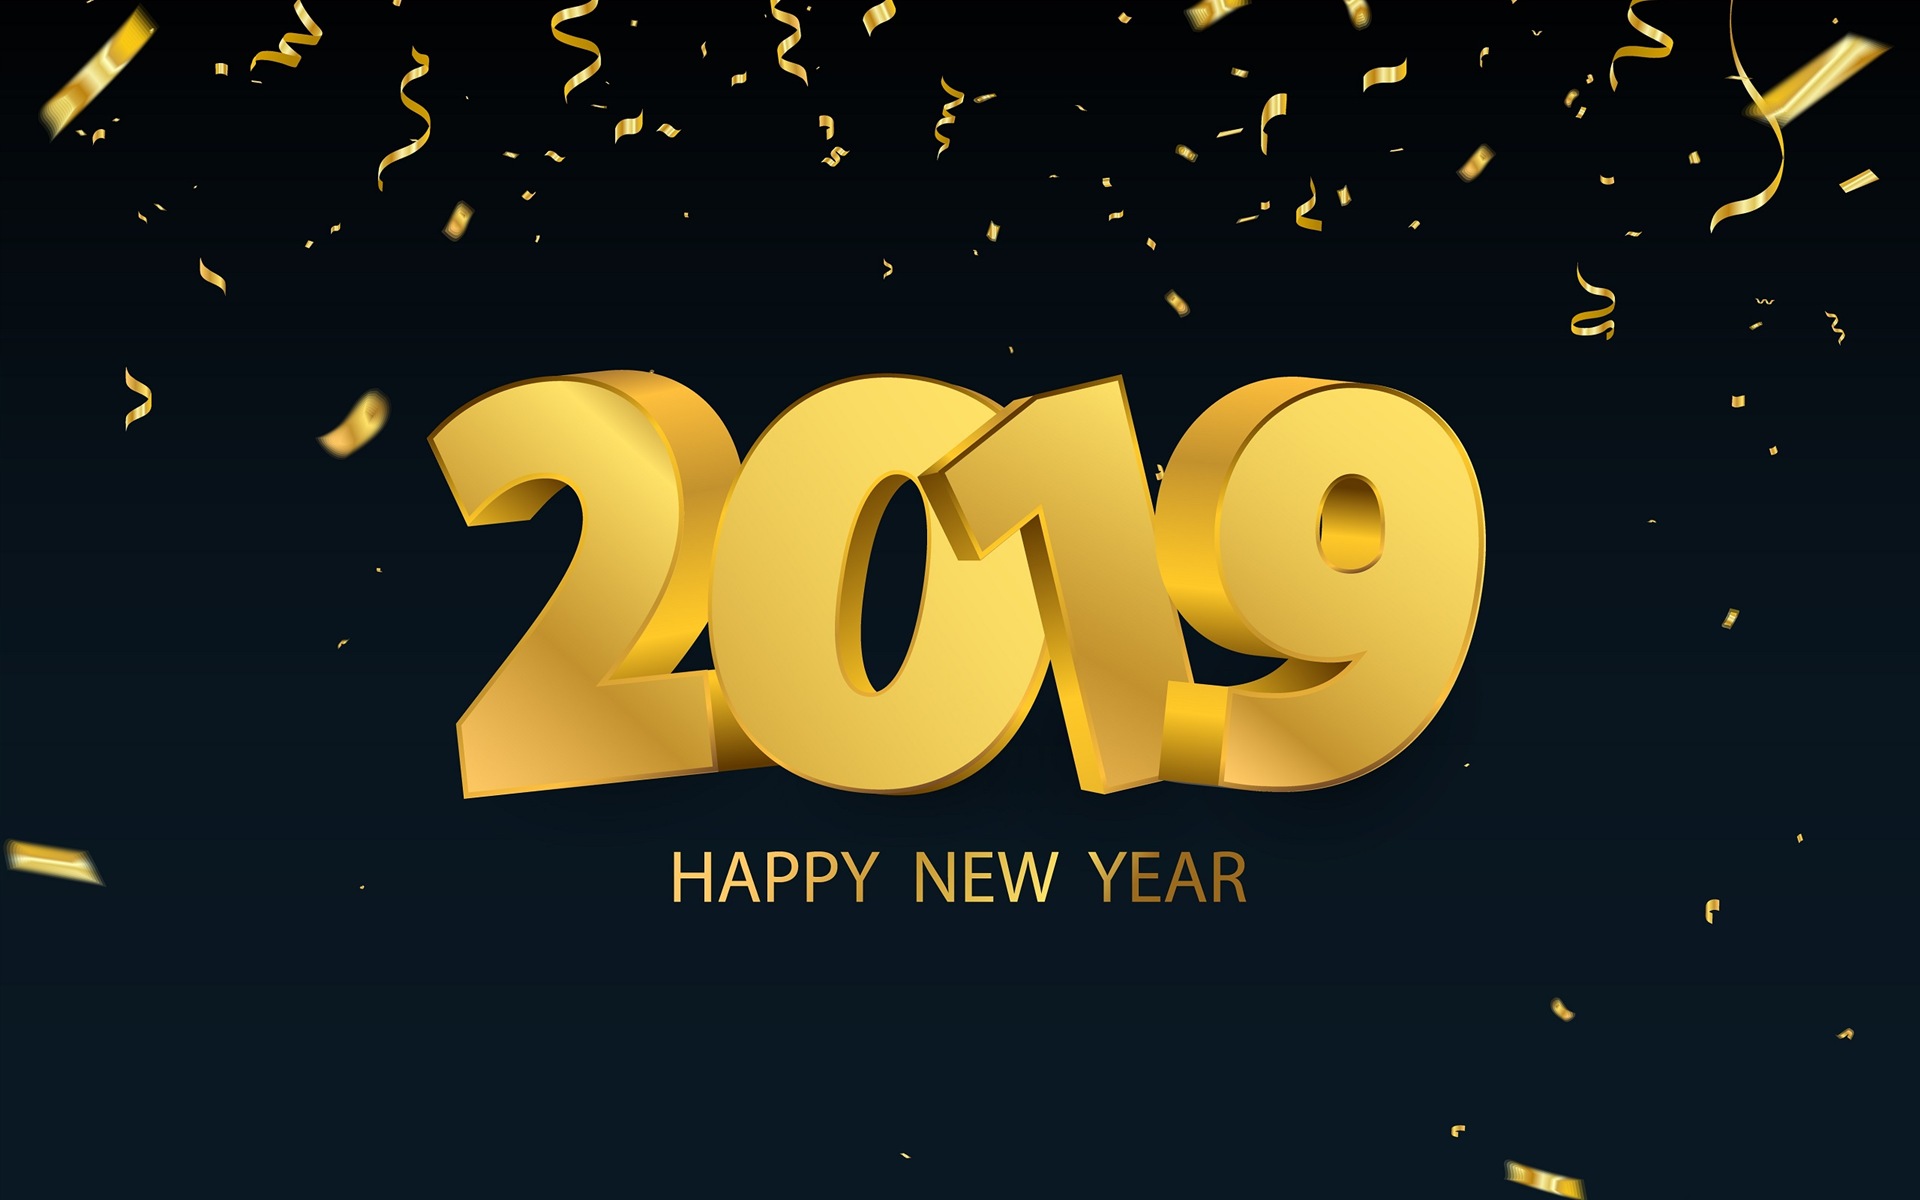 Happy New Year 2019 HD wallpapers #13 - 1920x1200